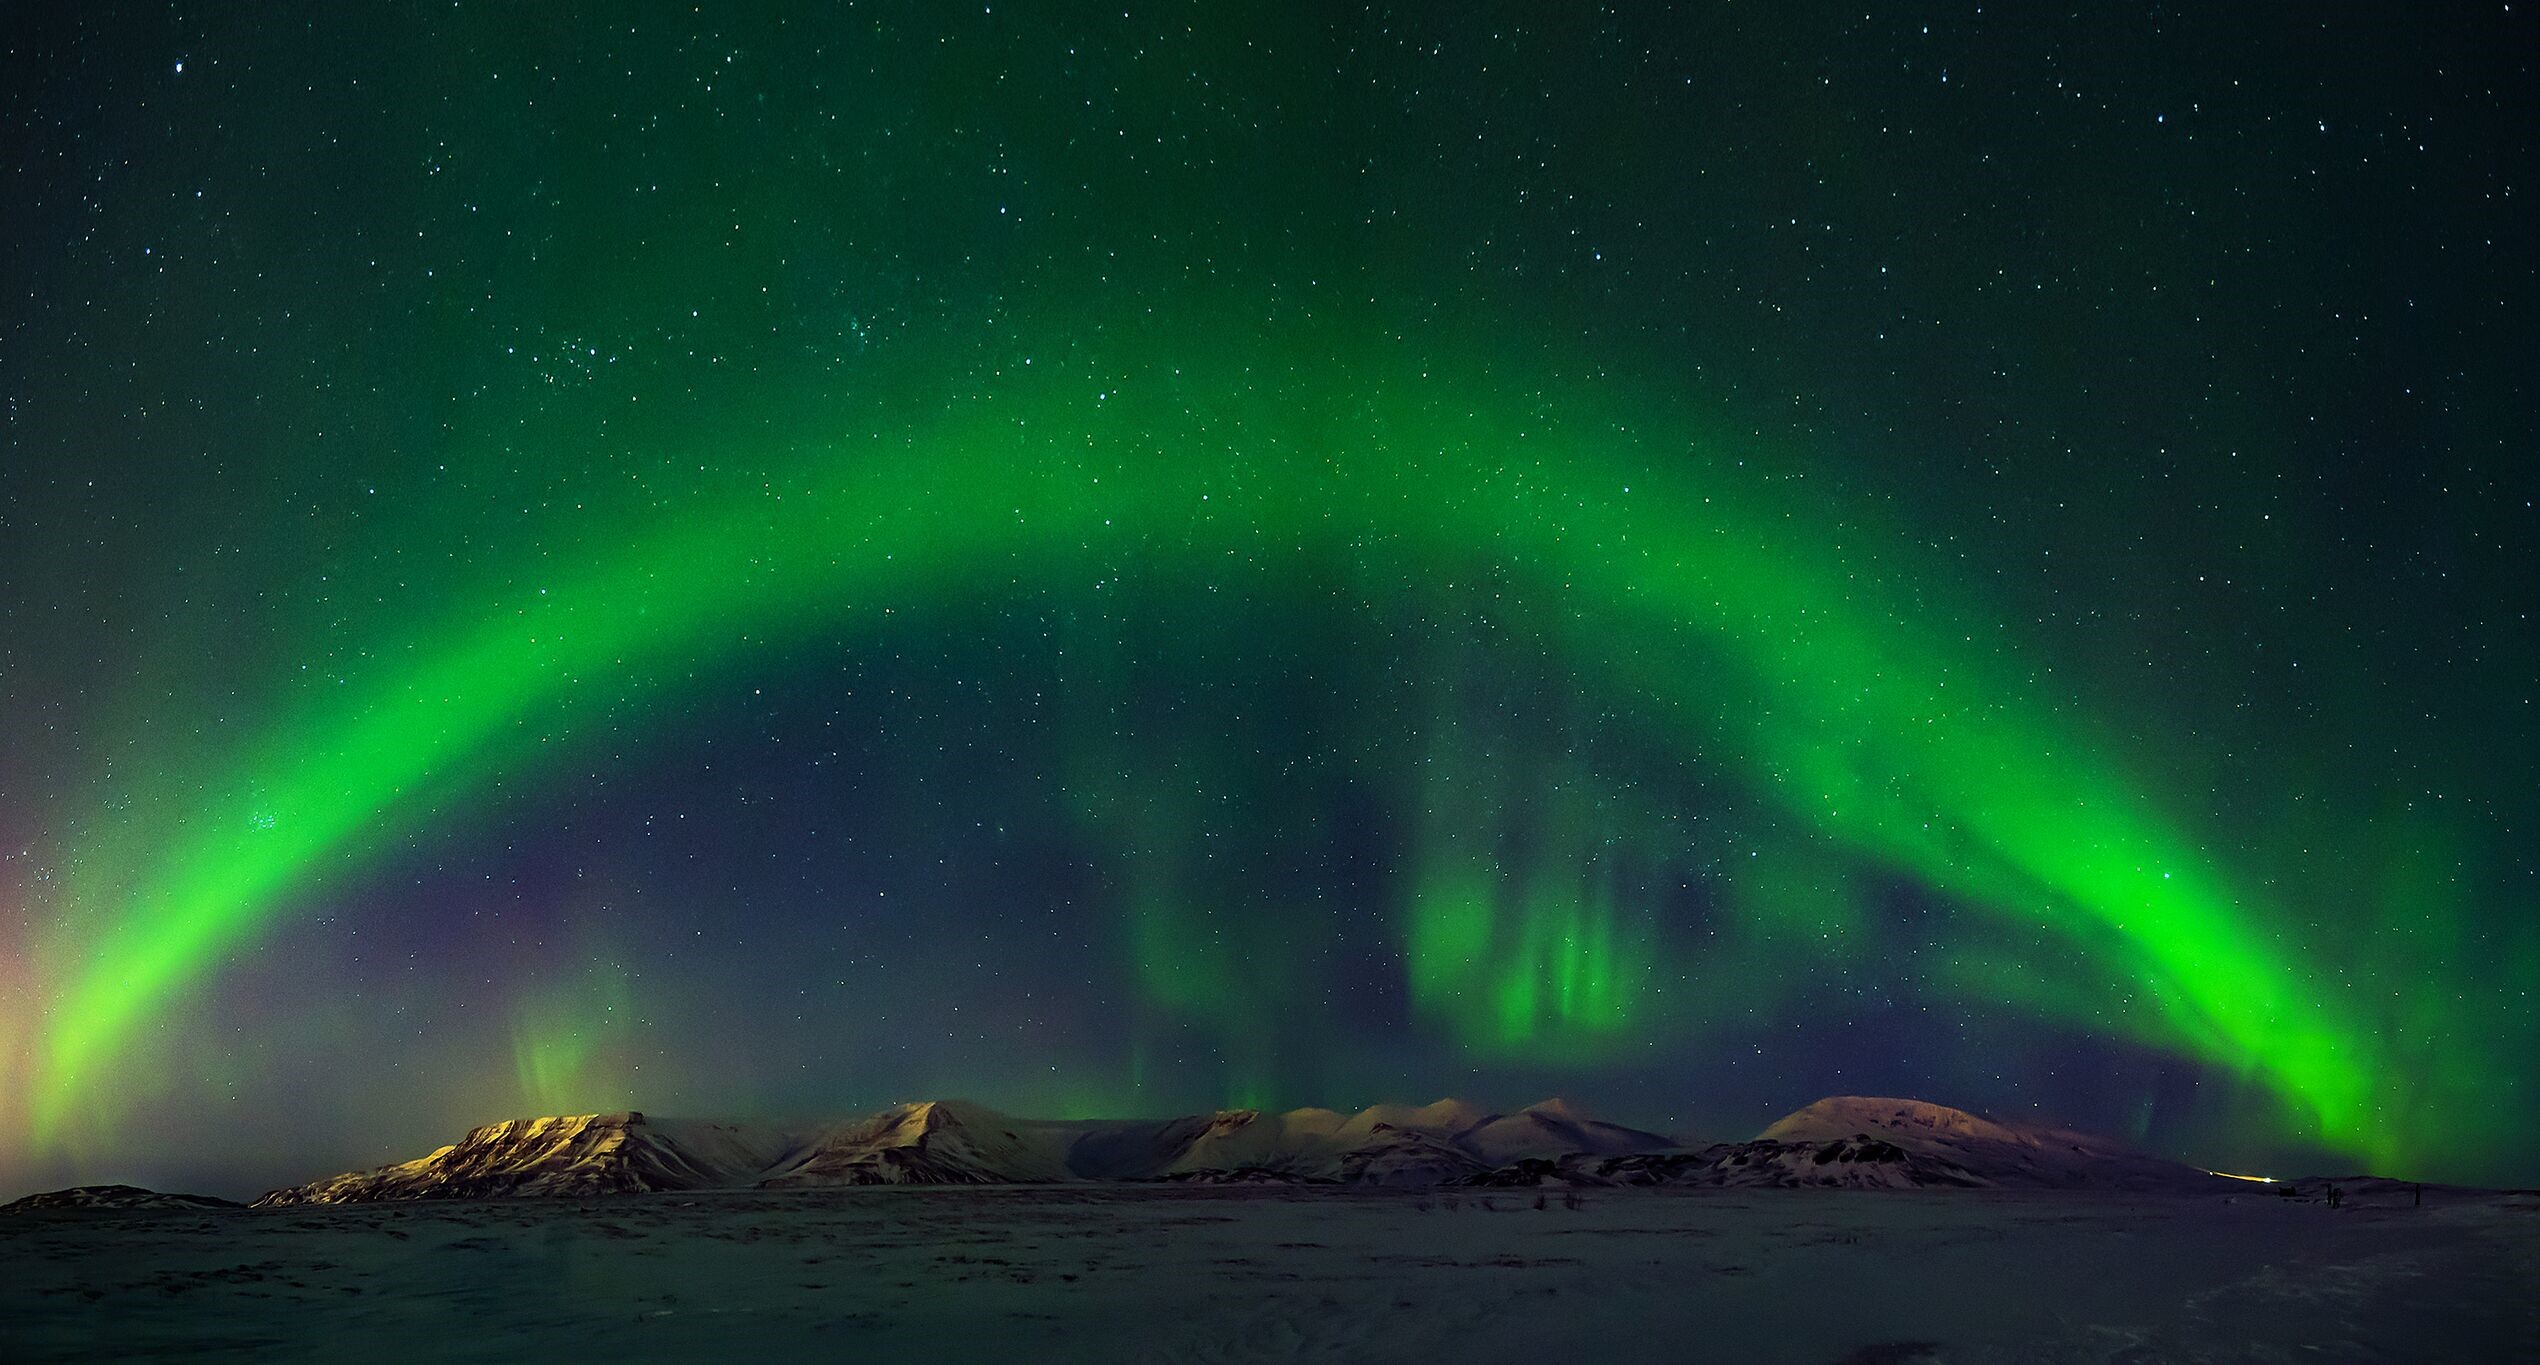 The northern lights arc above the beautiful natural Icelandic landscape